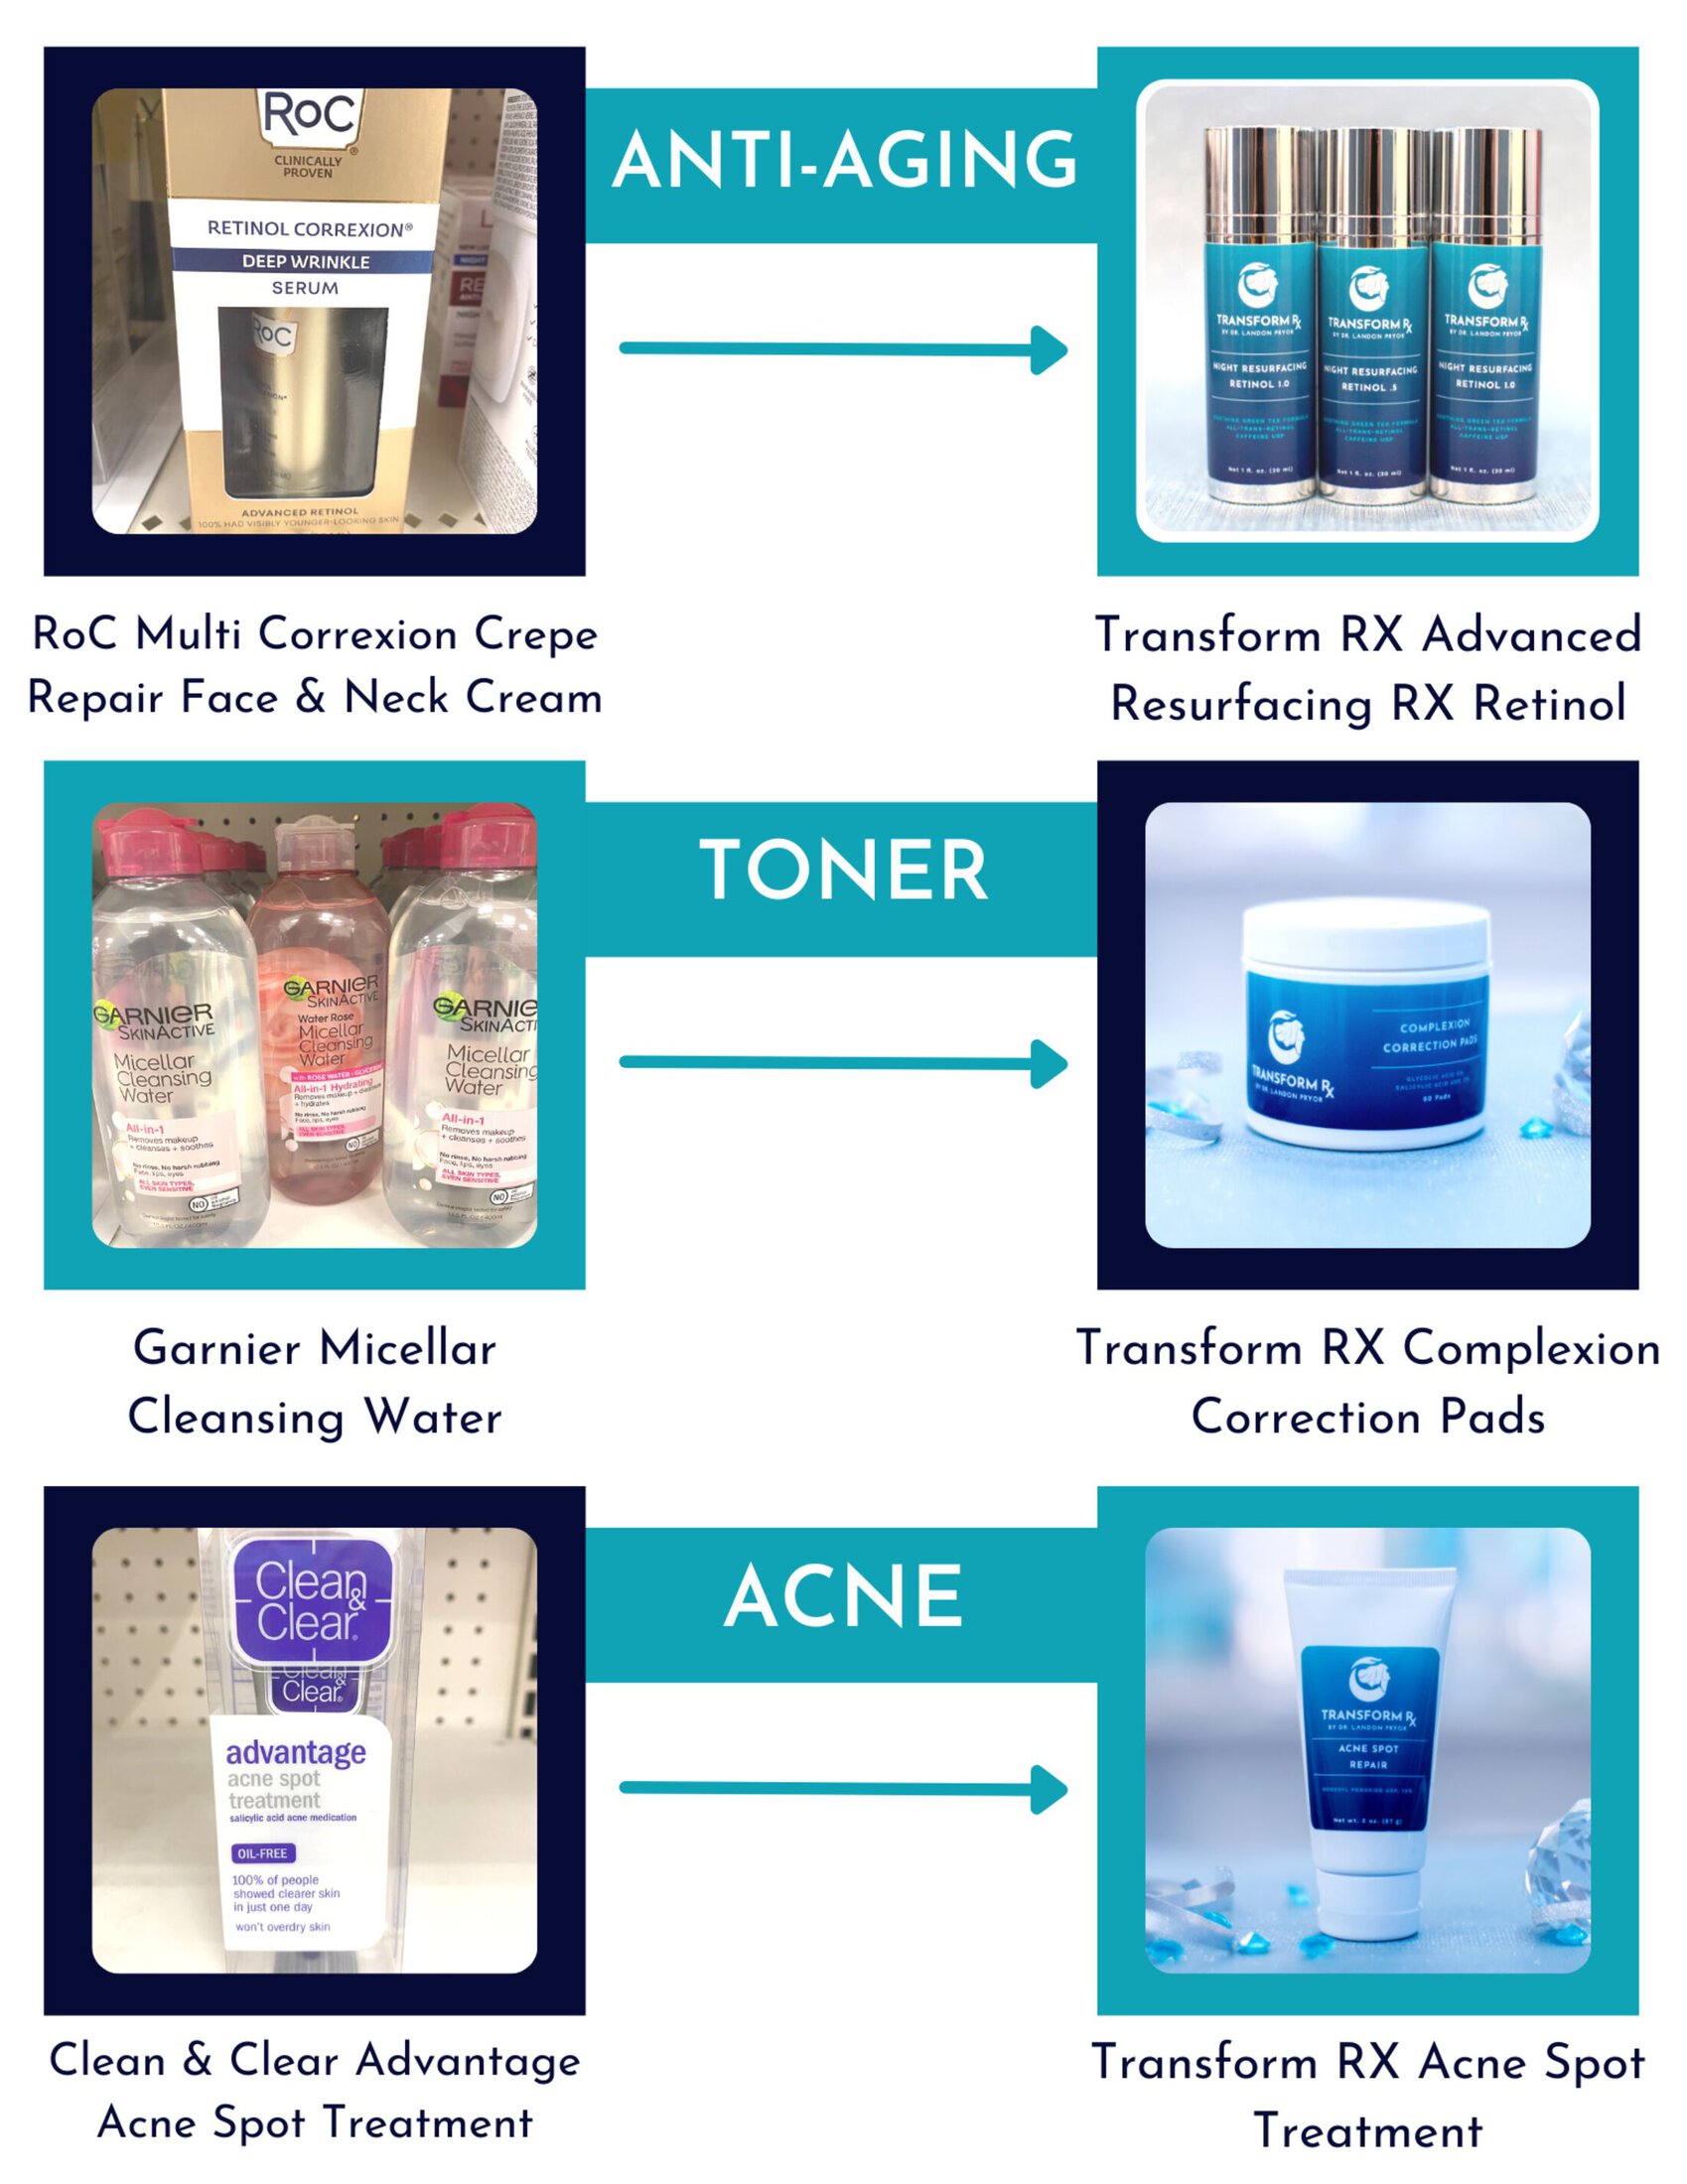 TransformRX products to swap